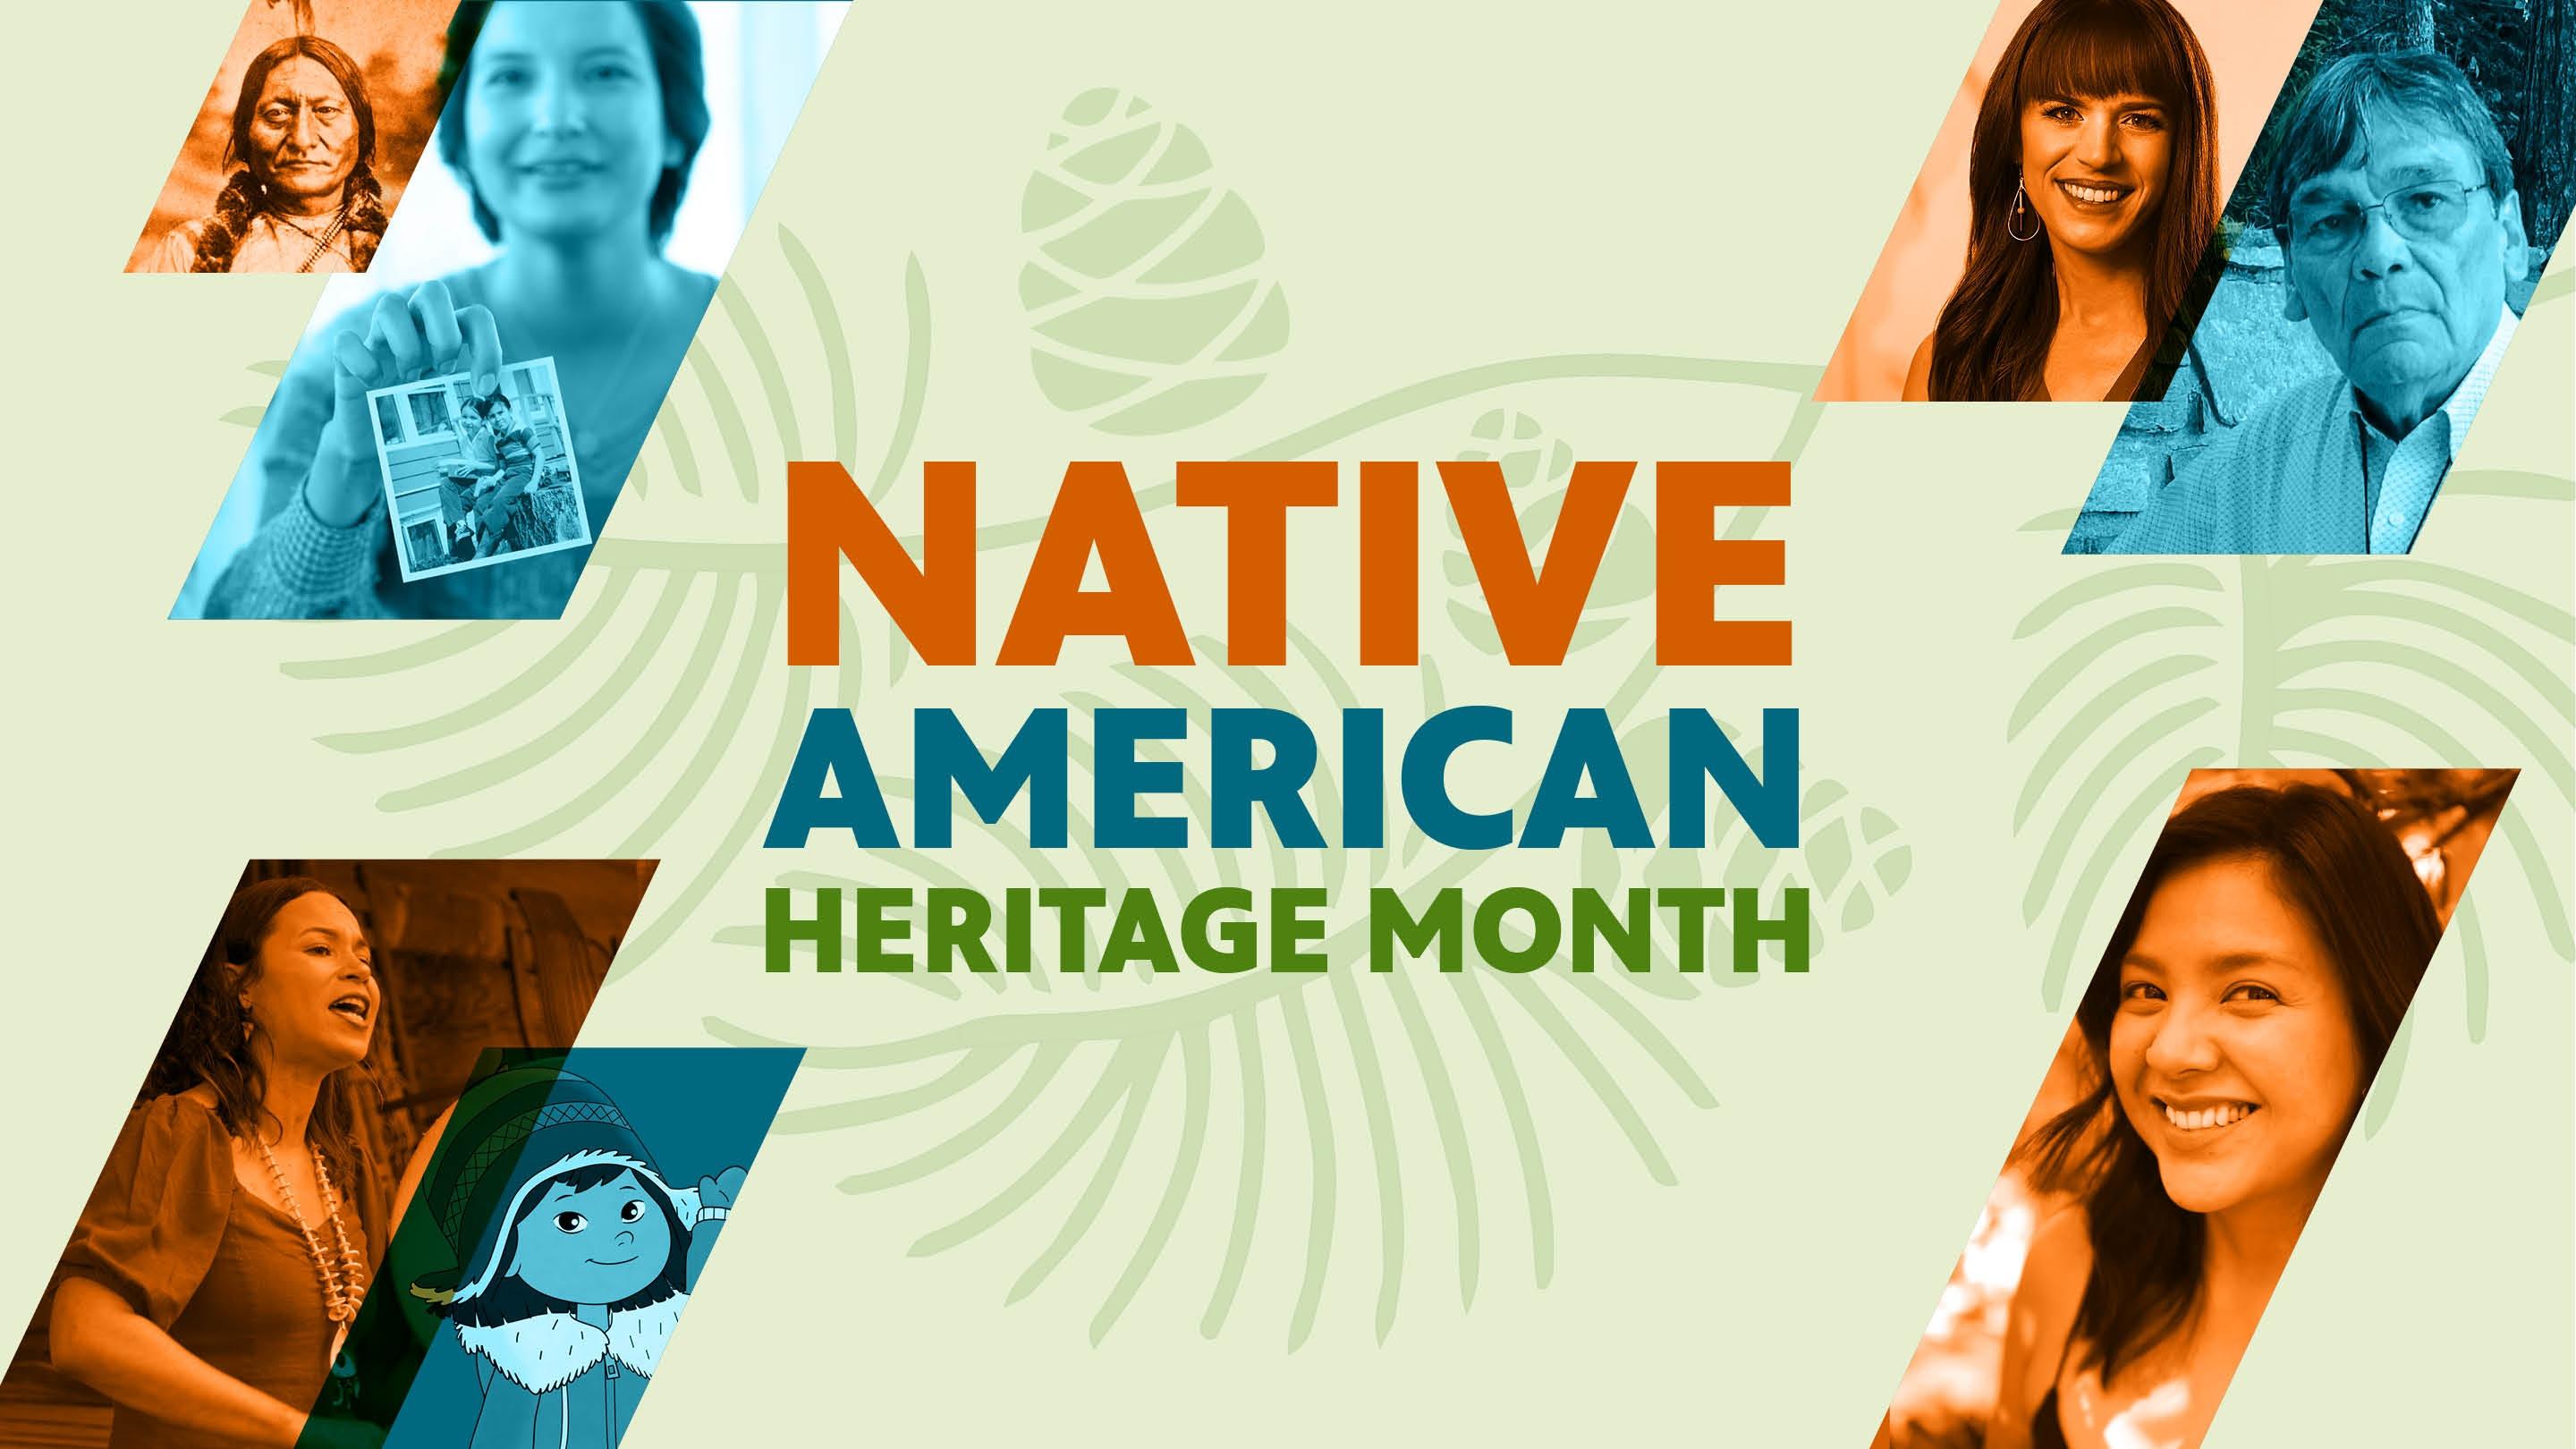 Native American Heritage Month graphics with pins cone graphic in the background and various Native and Indigenous characters from PBS shows featured.